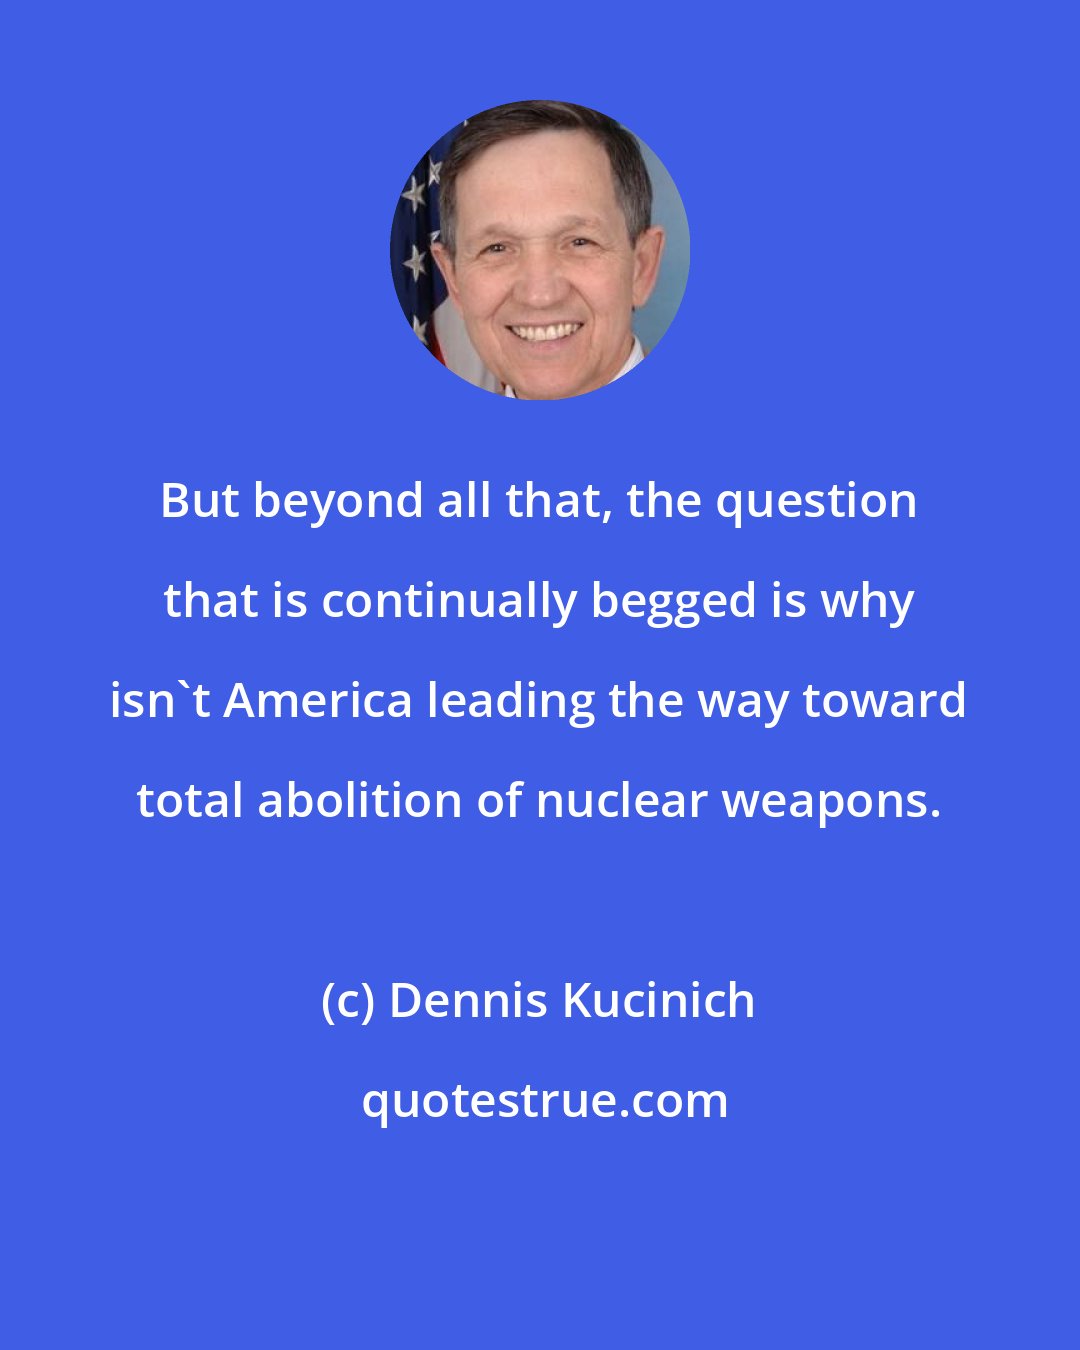 Dennis Kucinich: But beyond all that, the question that is continually begged is why isn't America leading the way toward total abolition of nuclear weapons.